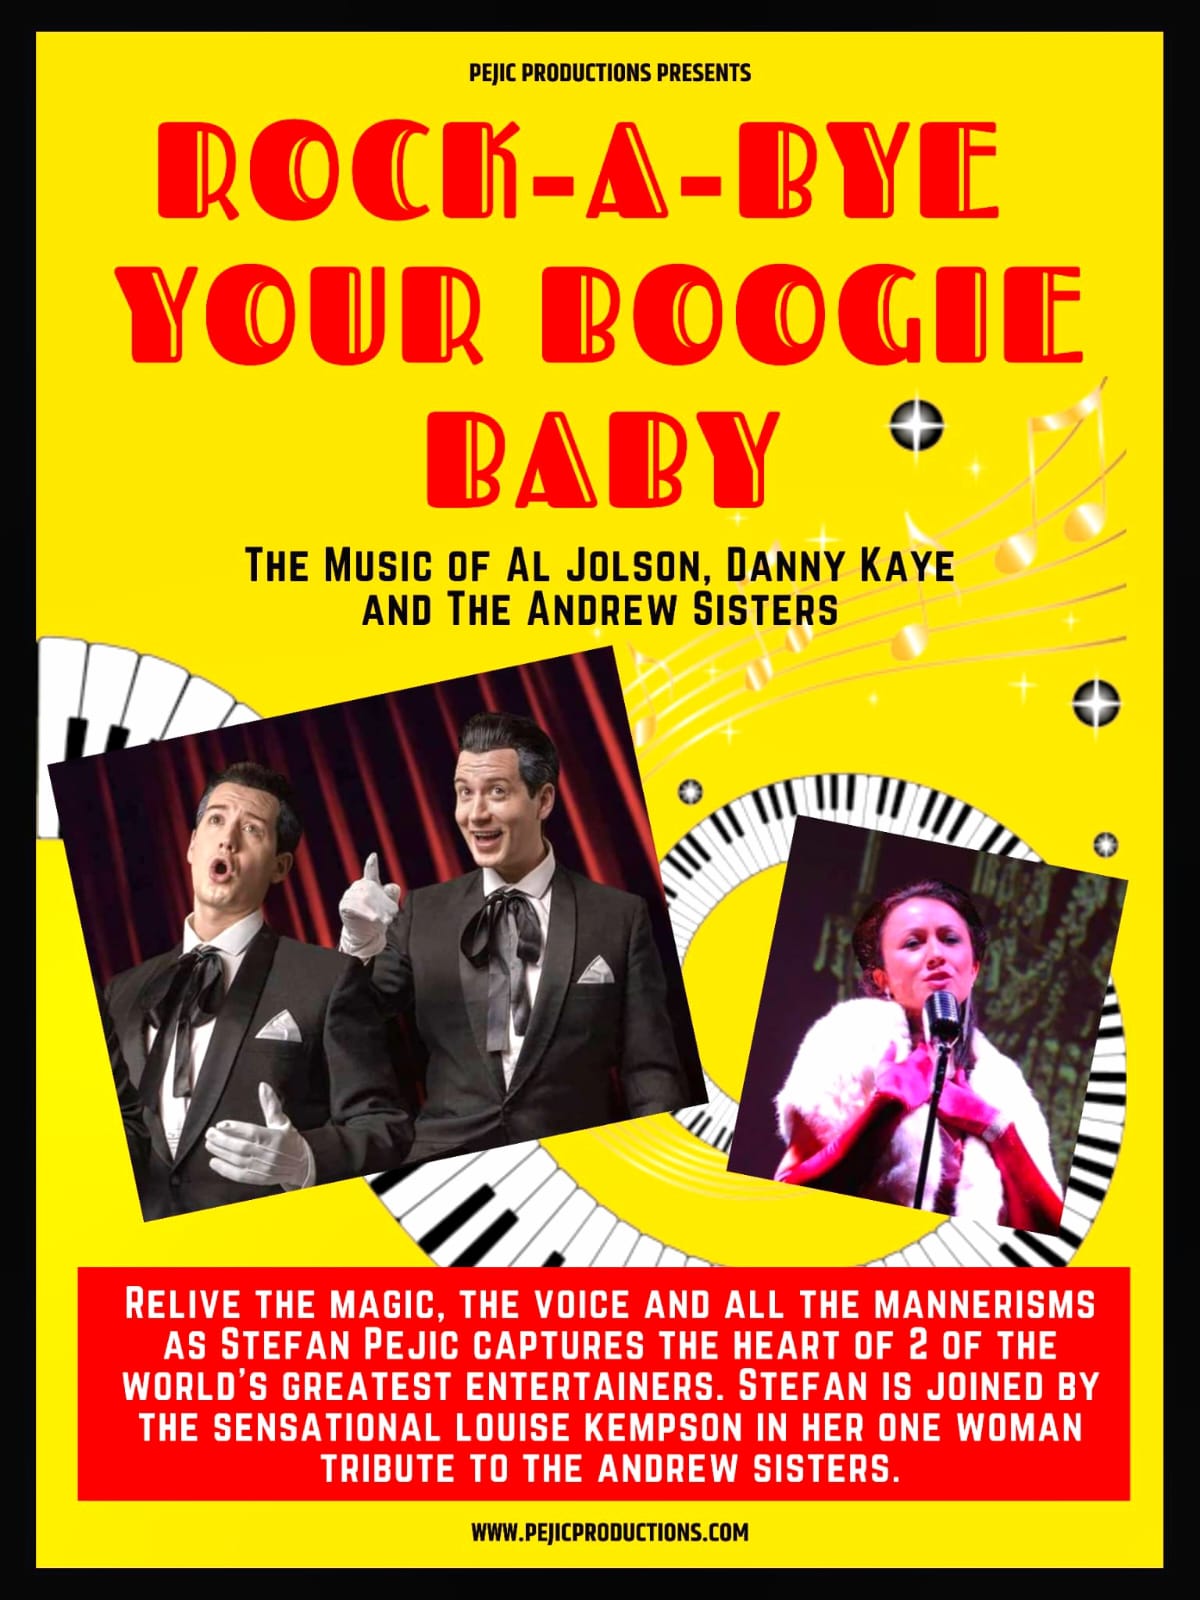 Rock-A-Bye Your Boogie Baby, featuring the music of Al Jolson, Danny Kaye and The Andrews Sisters